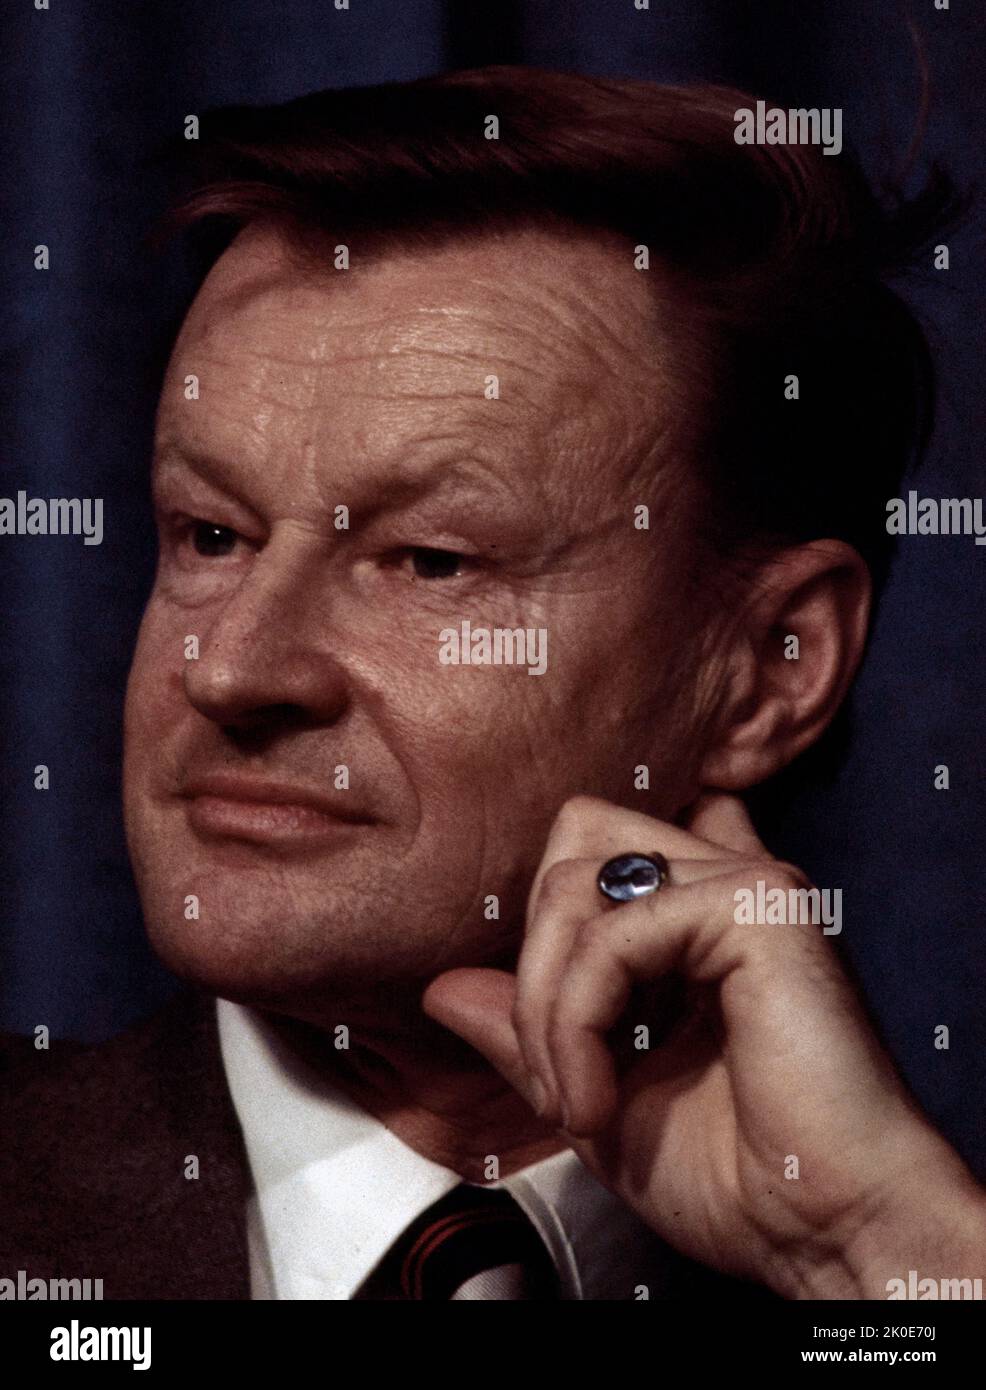 Zbigniew Kazimierz Brzezinski (1928 - 2017) Polish-American diplomat and political scientist. He served as a counsellor to President Lyndon B. Johnson from 1966 to 1968 and was President Jimmy Carter's National Security Advisor from 1977 to 1981. Stock Photo